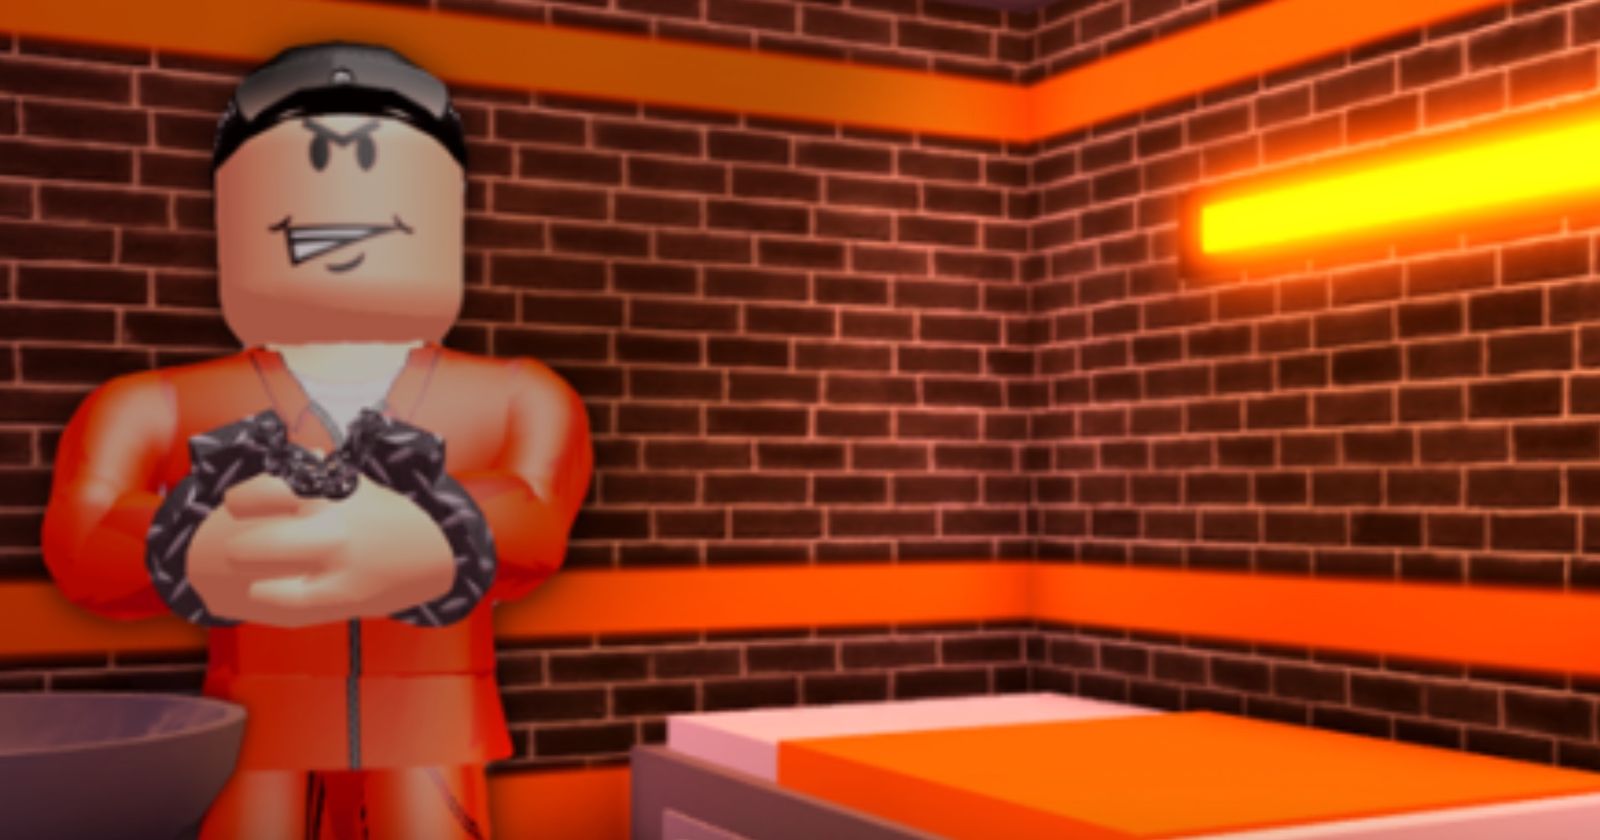 ALL CODES in Roblox Jailbreak! NEW TWITTER PROMO CODES! *FREE CASH*